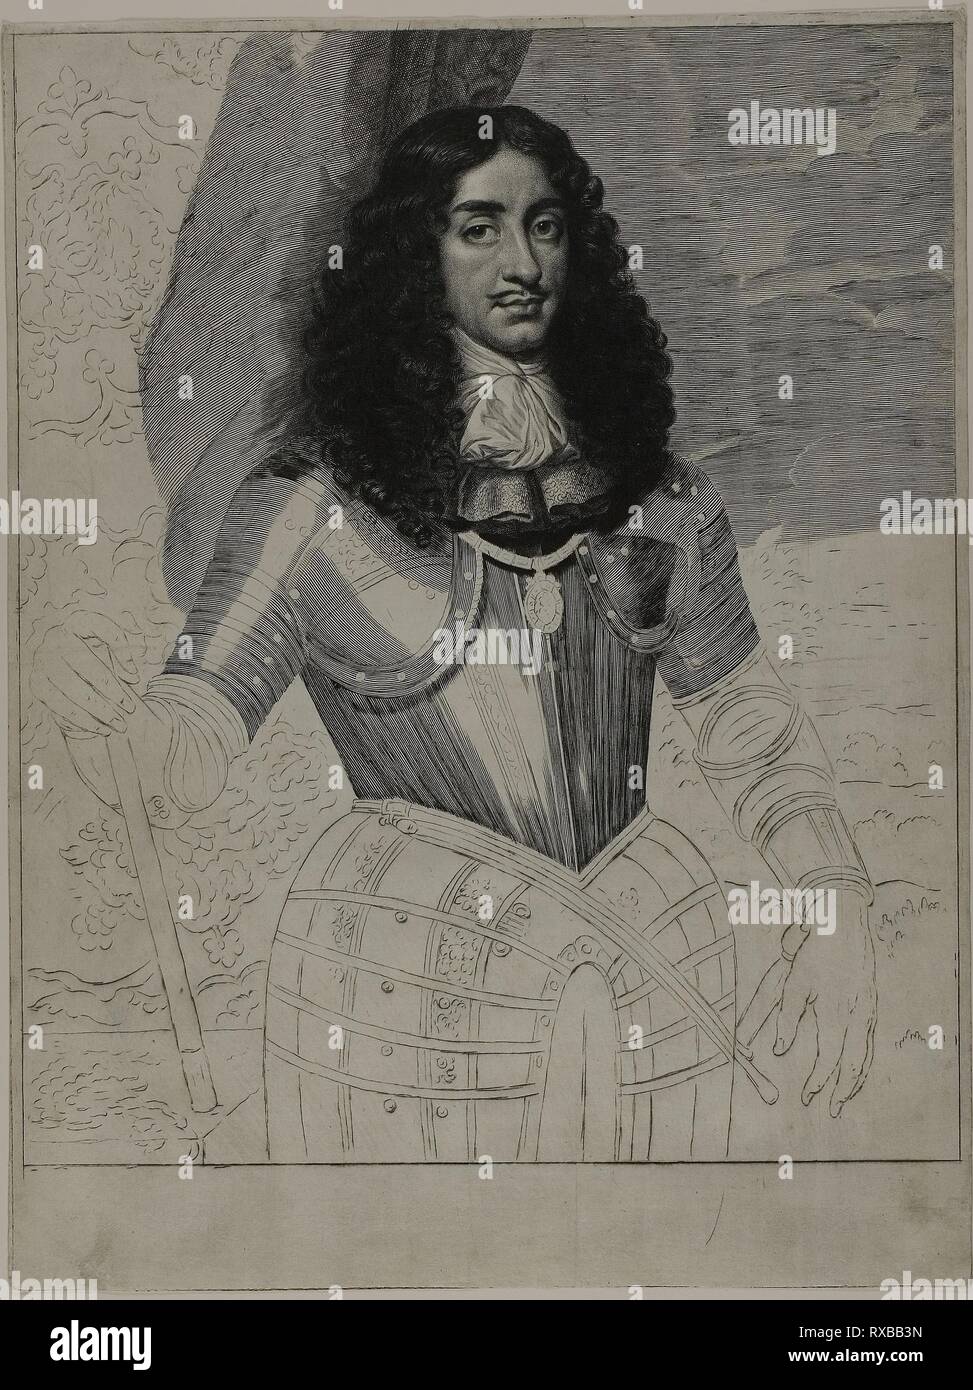 Charles II, King of England. Cornelis van Dalen I (Dutch, 1602-1665); after Pieter Nason (Dutch, c. 1612-1690). Date: 1658-1663. Dimensions: 337 x 278 mm (image/plate); 377 x 281 mm (sheet). Engraving and drypoint on ivory laid paper. Origin: Holland. Museum: The Chicago Art Institute. Stock Photo